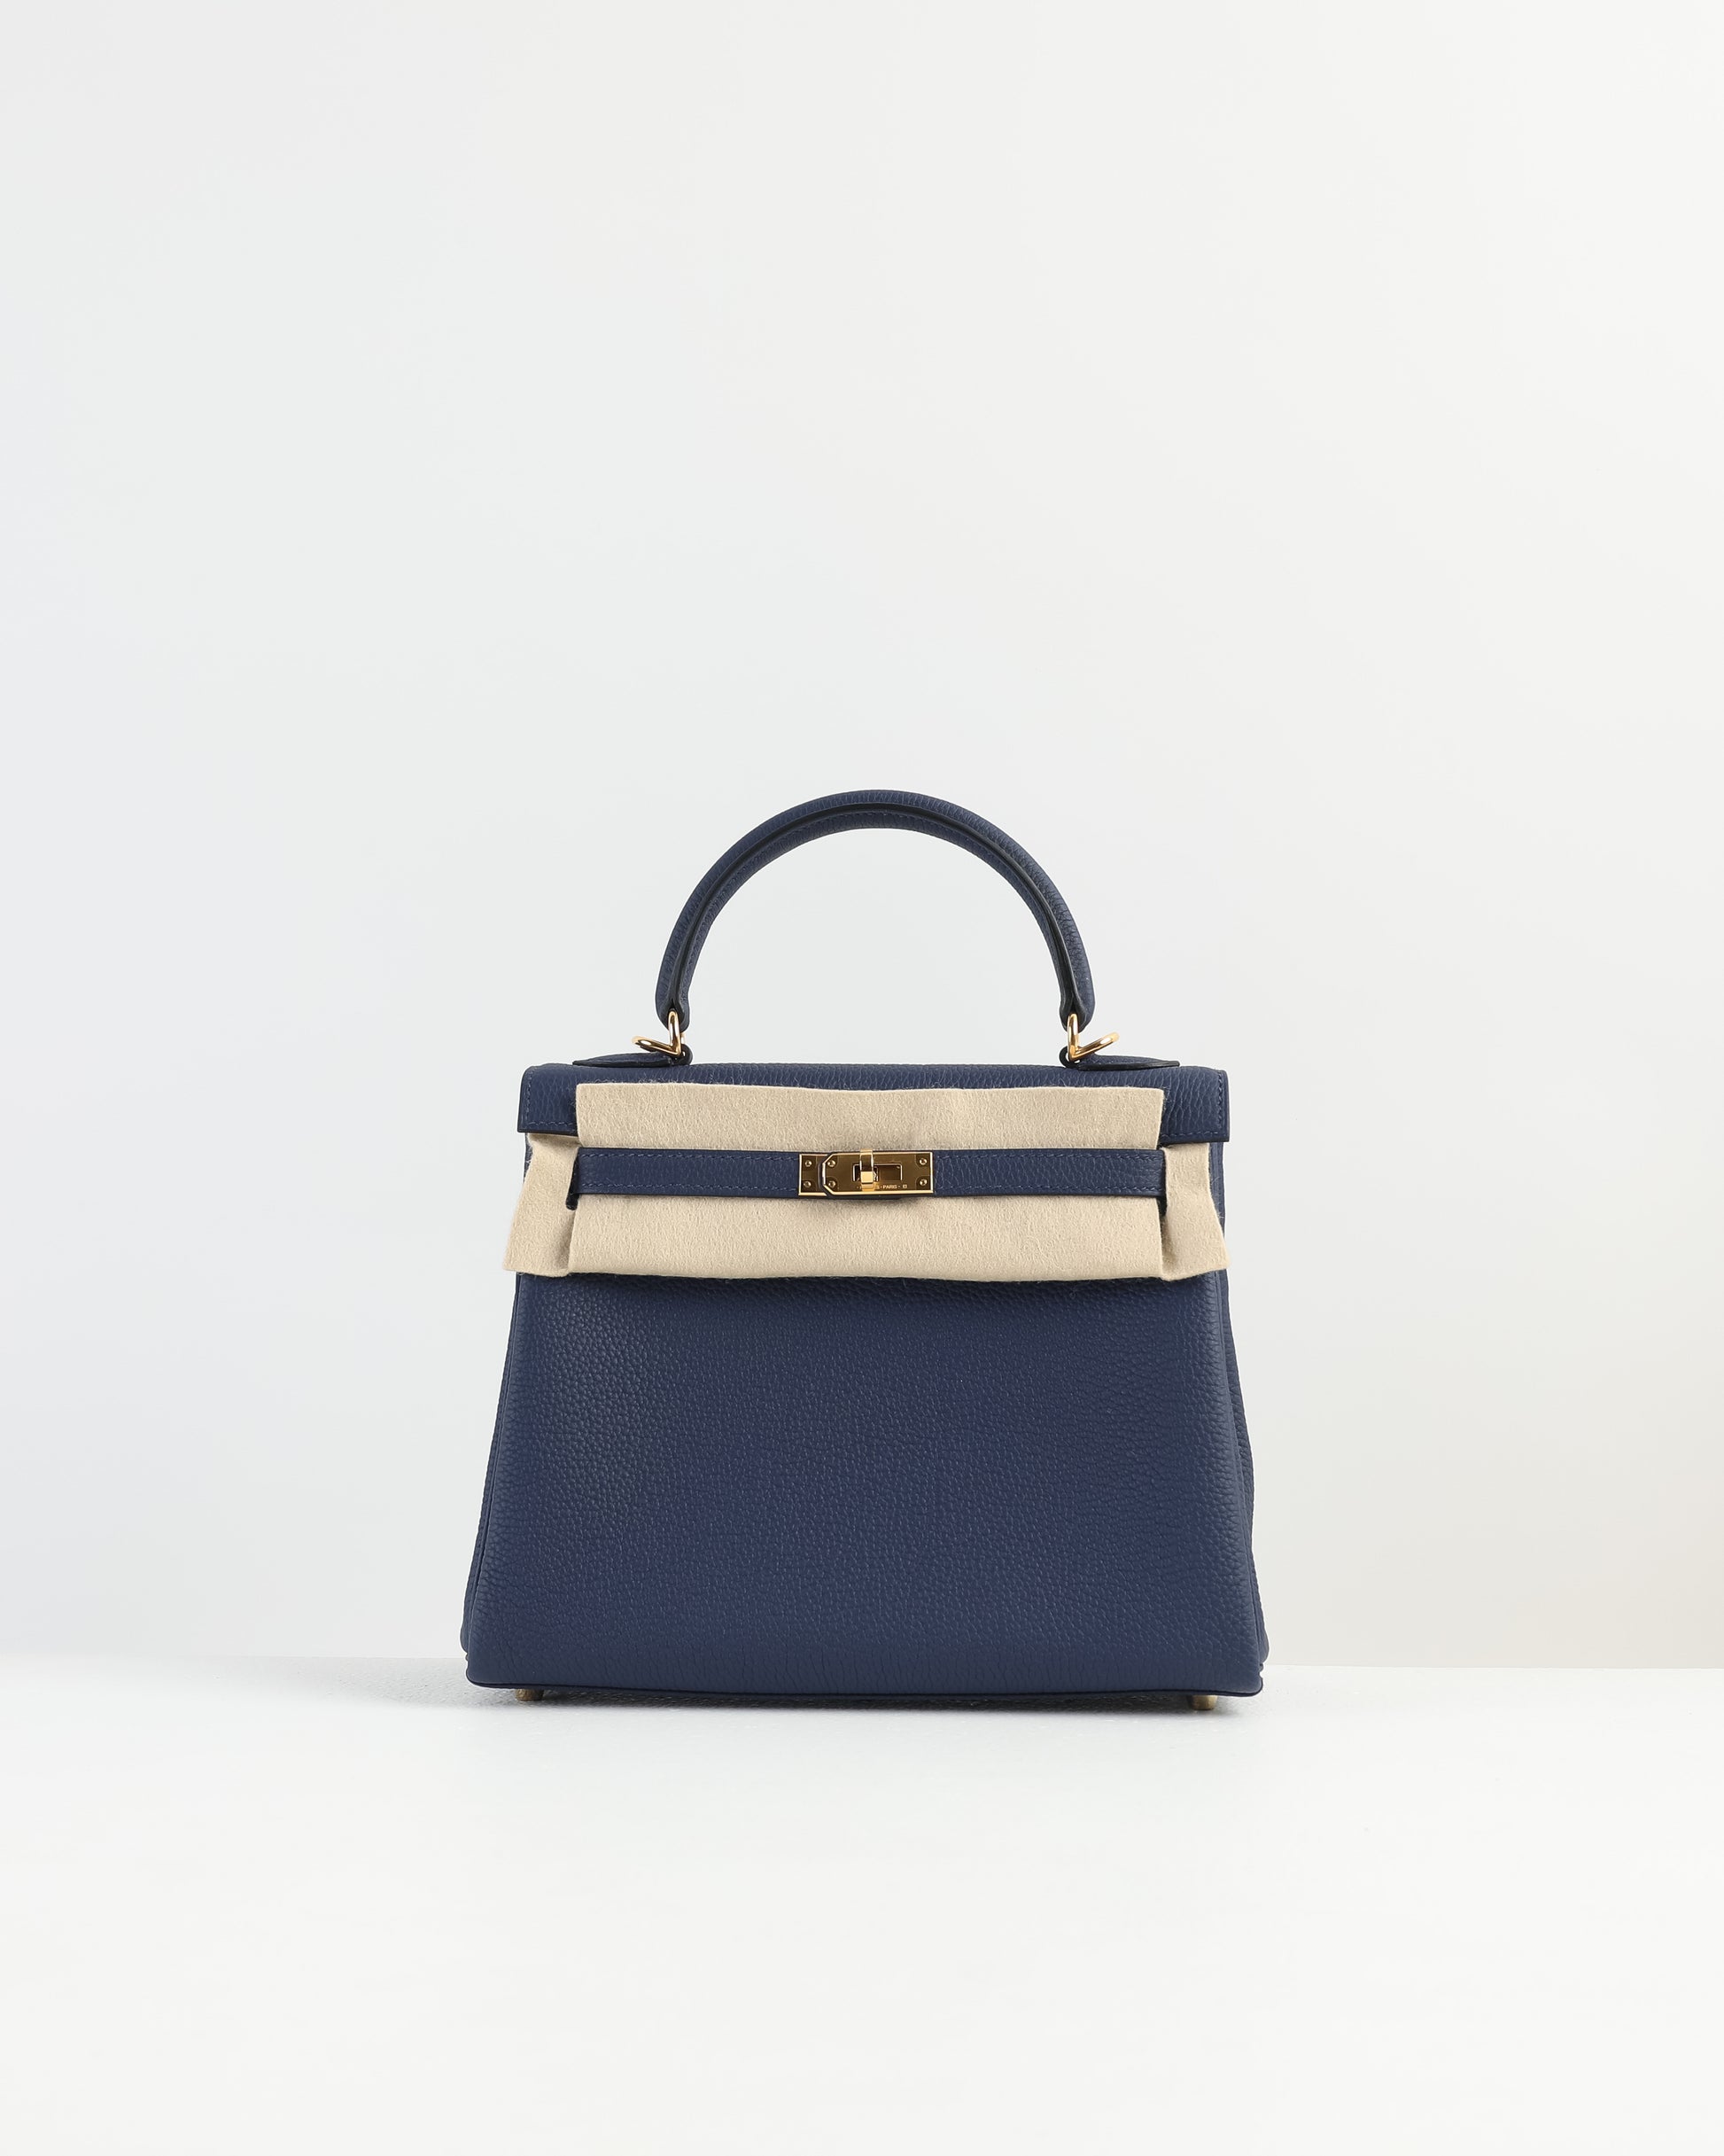 Kelly 25 Bleu Nuit in Togo Leather with Gold Hardware – Diamonds in Dubai